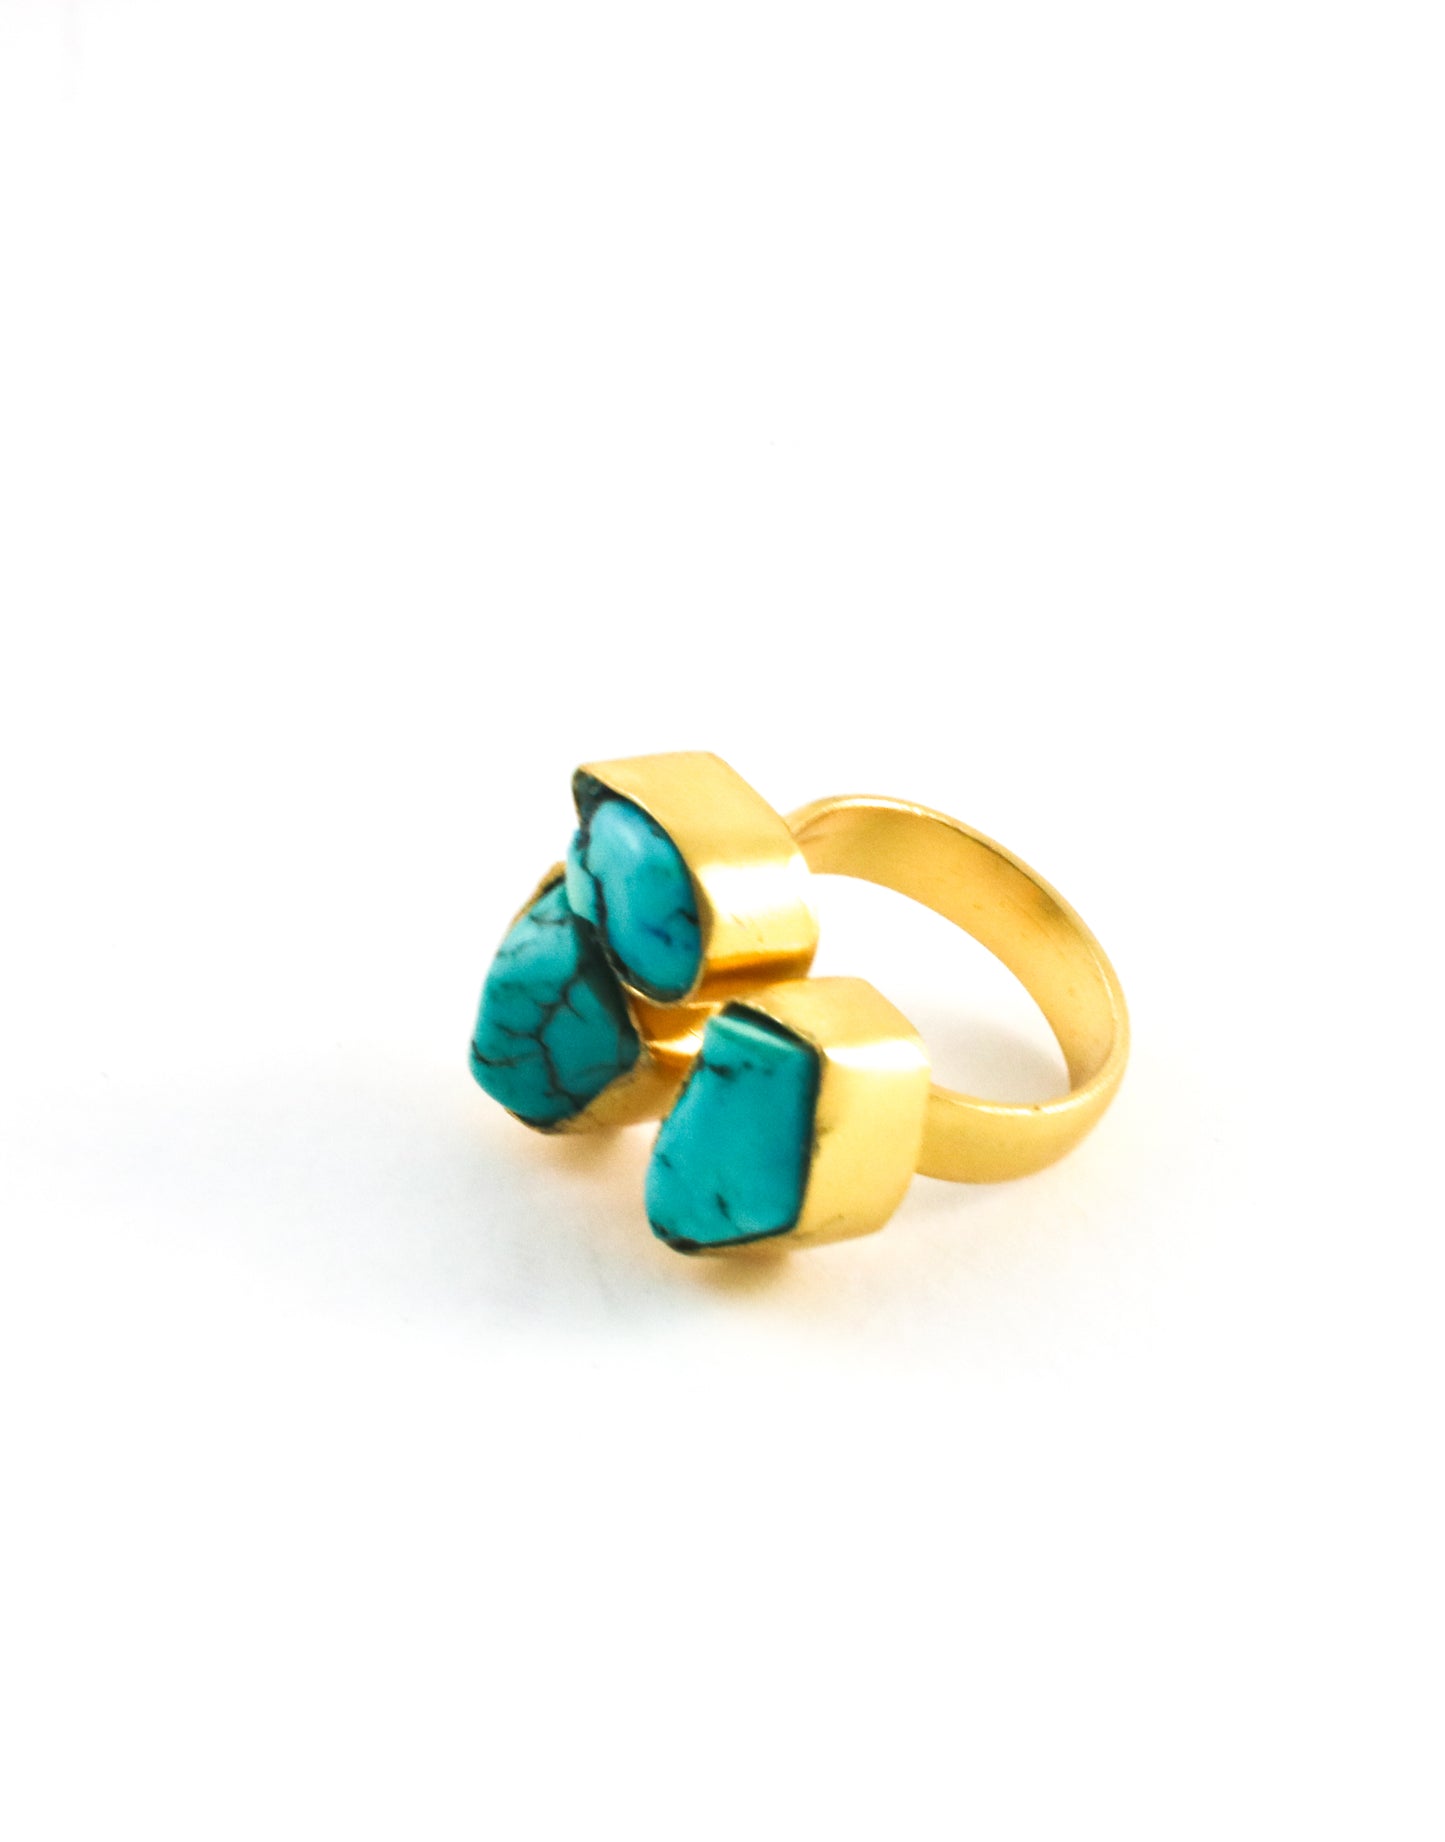 Turquoise set in gold ring